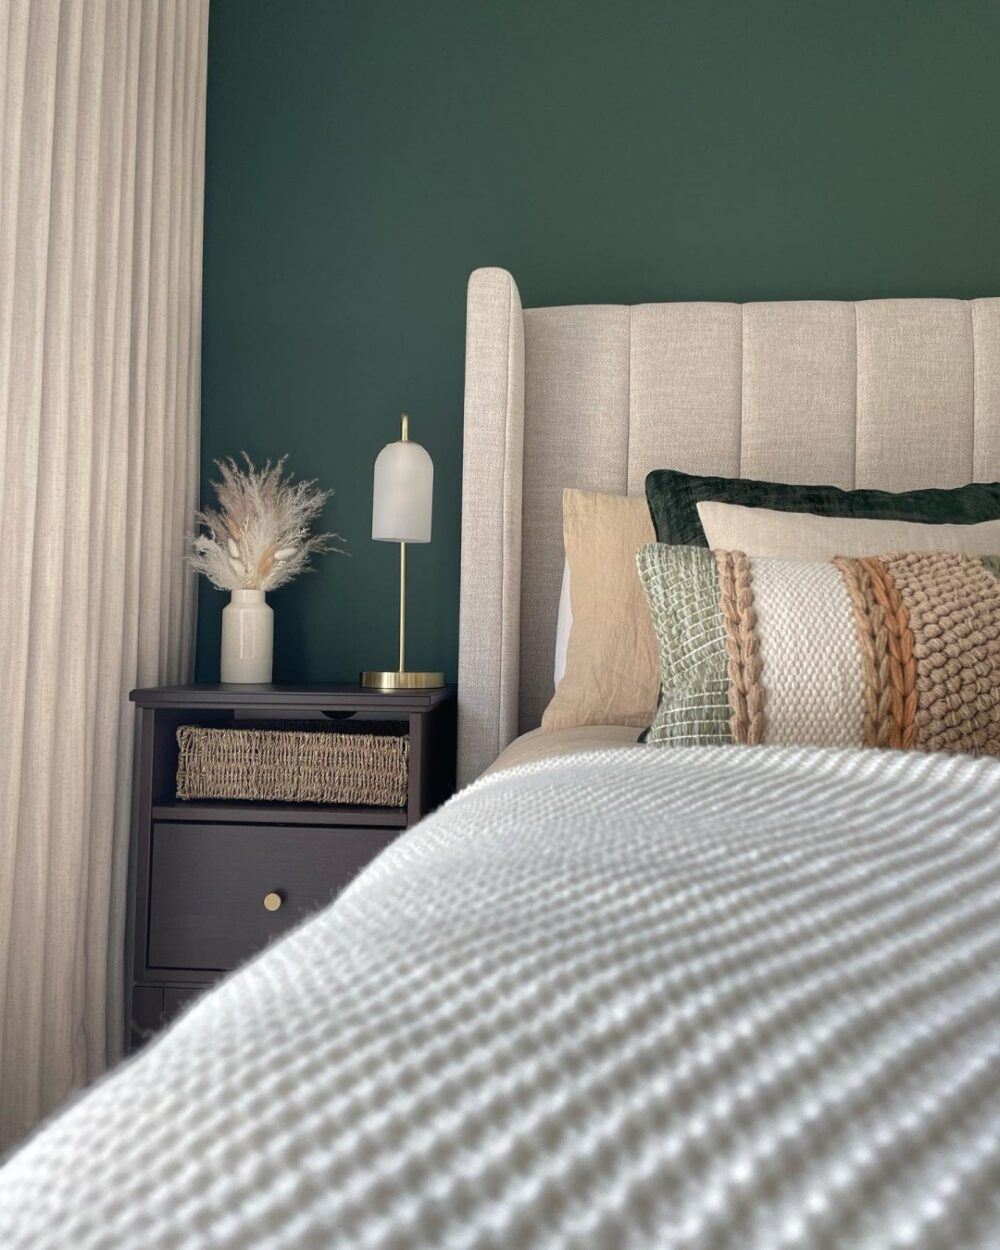 A grey upholstered bed frame, styled in a dark green bedroom